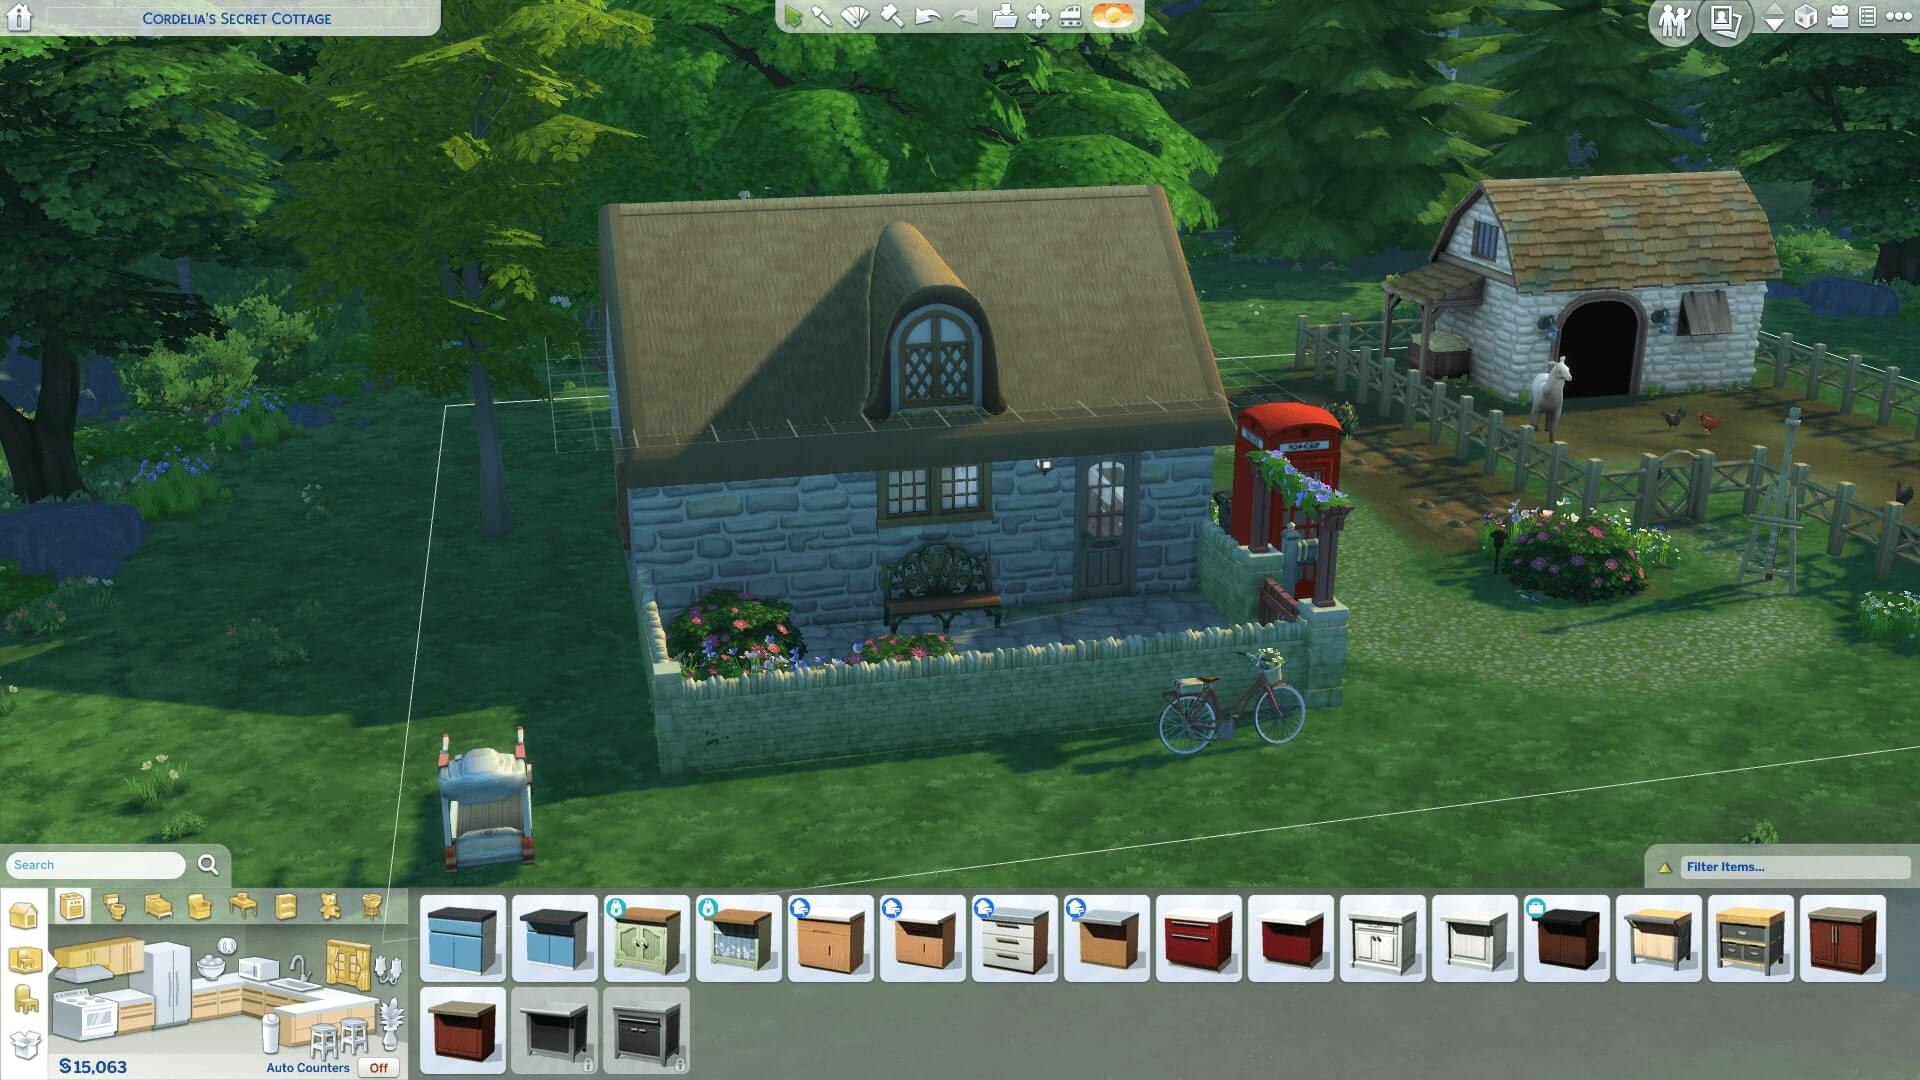 A screenshot showing a cottage